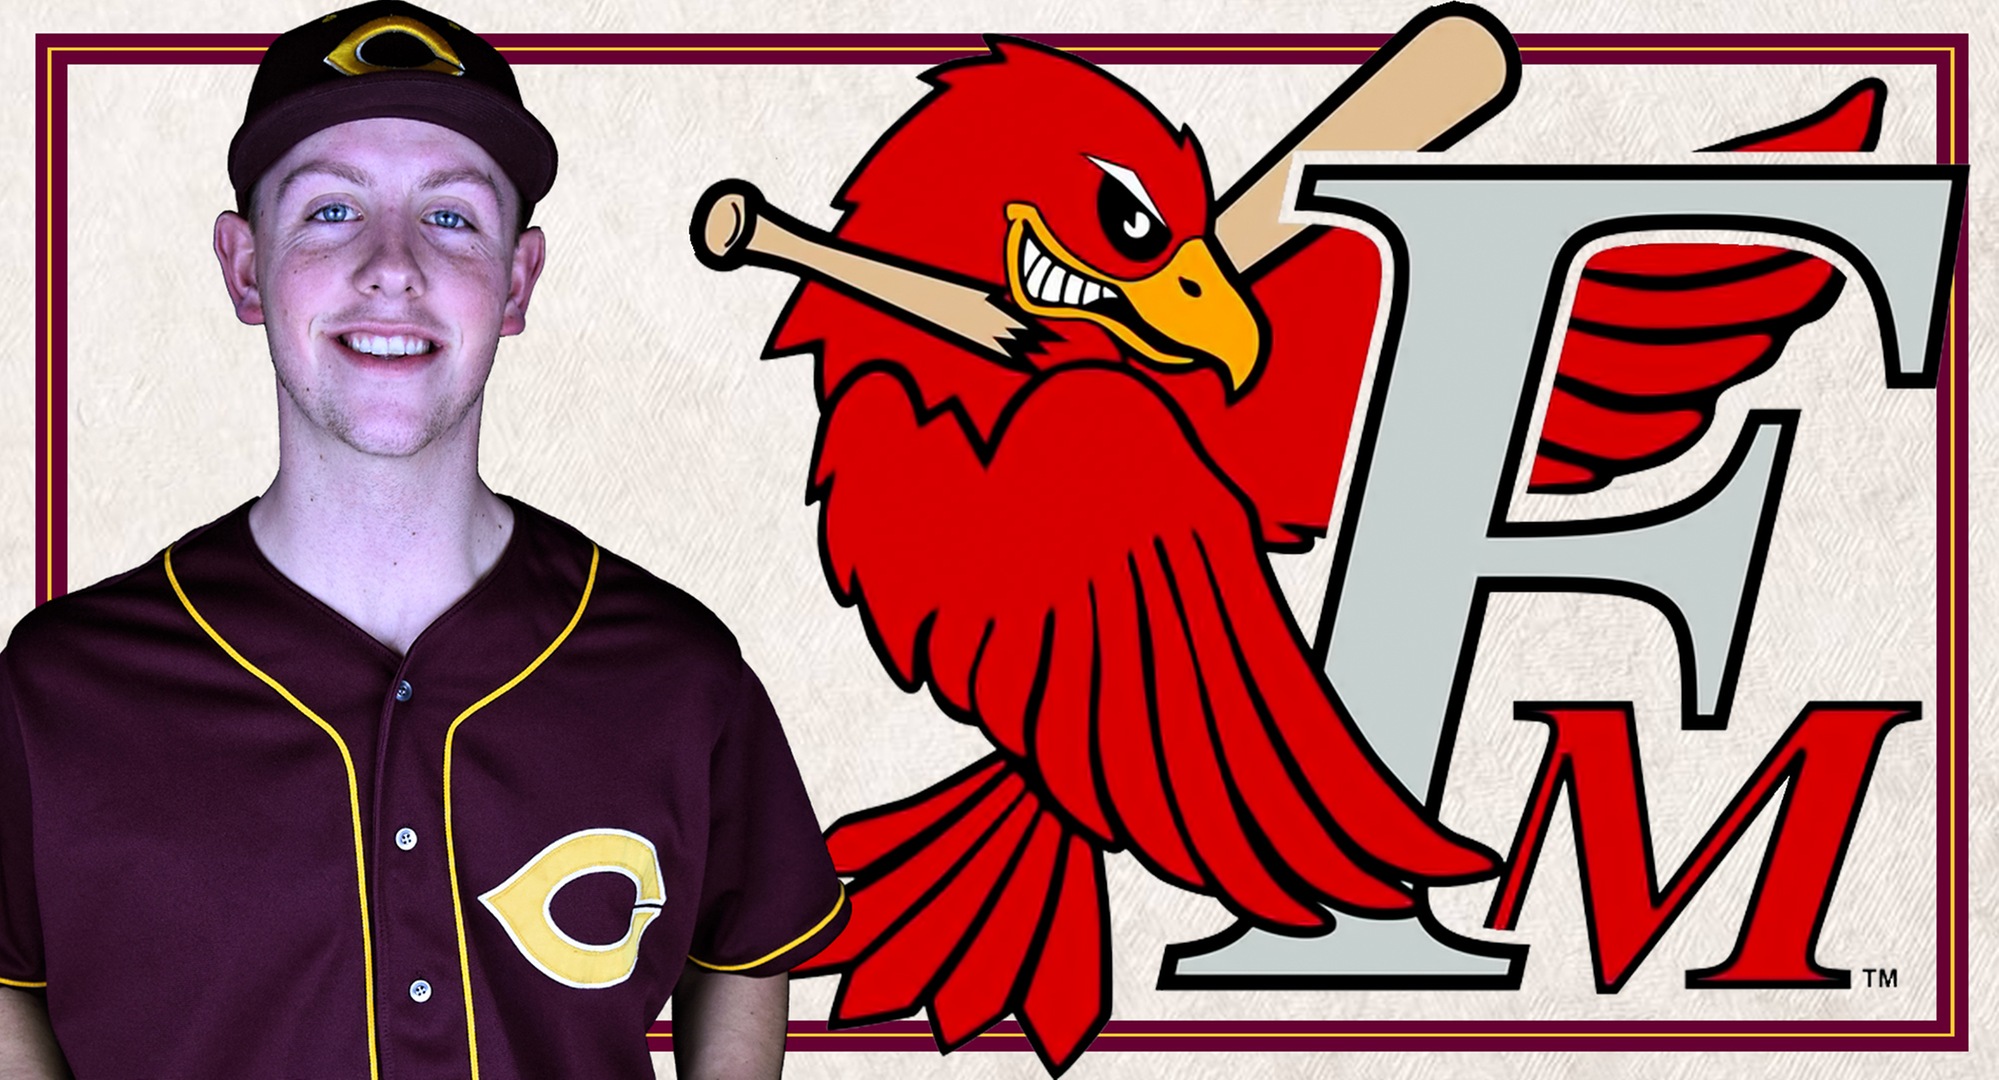 Former Concordia right-handed pitcher Cole Christensen has signed a professional contract with the Fargo-Moorhead RedHawks.